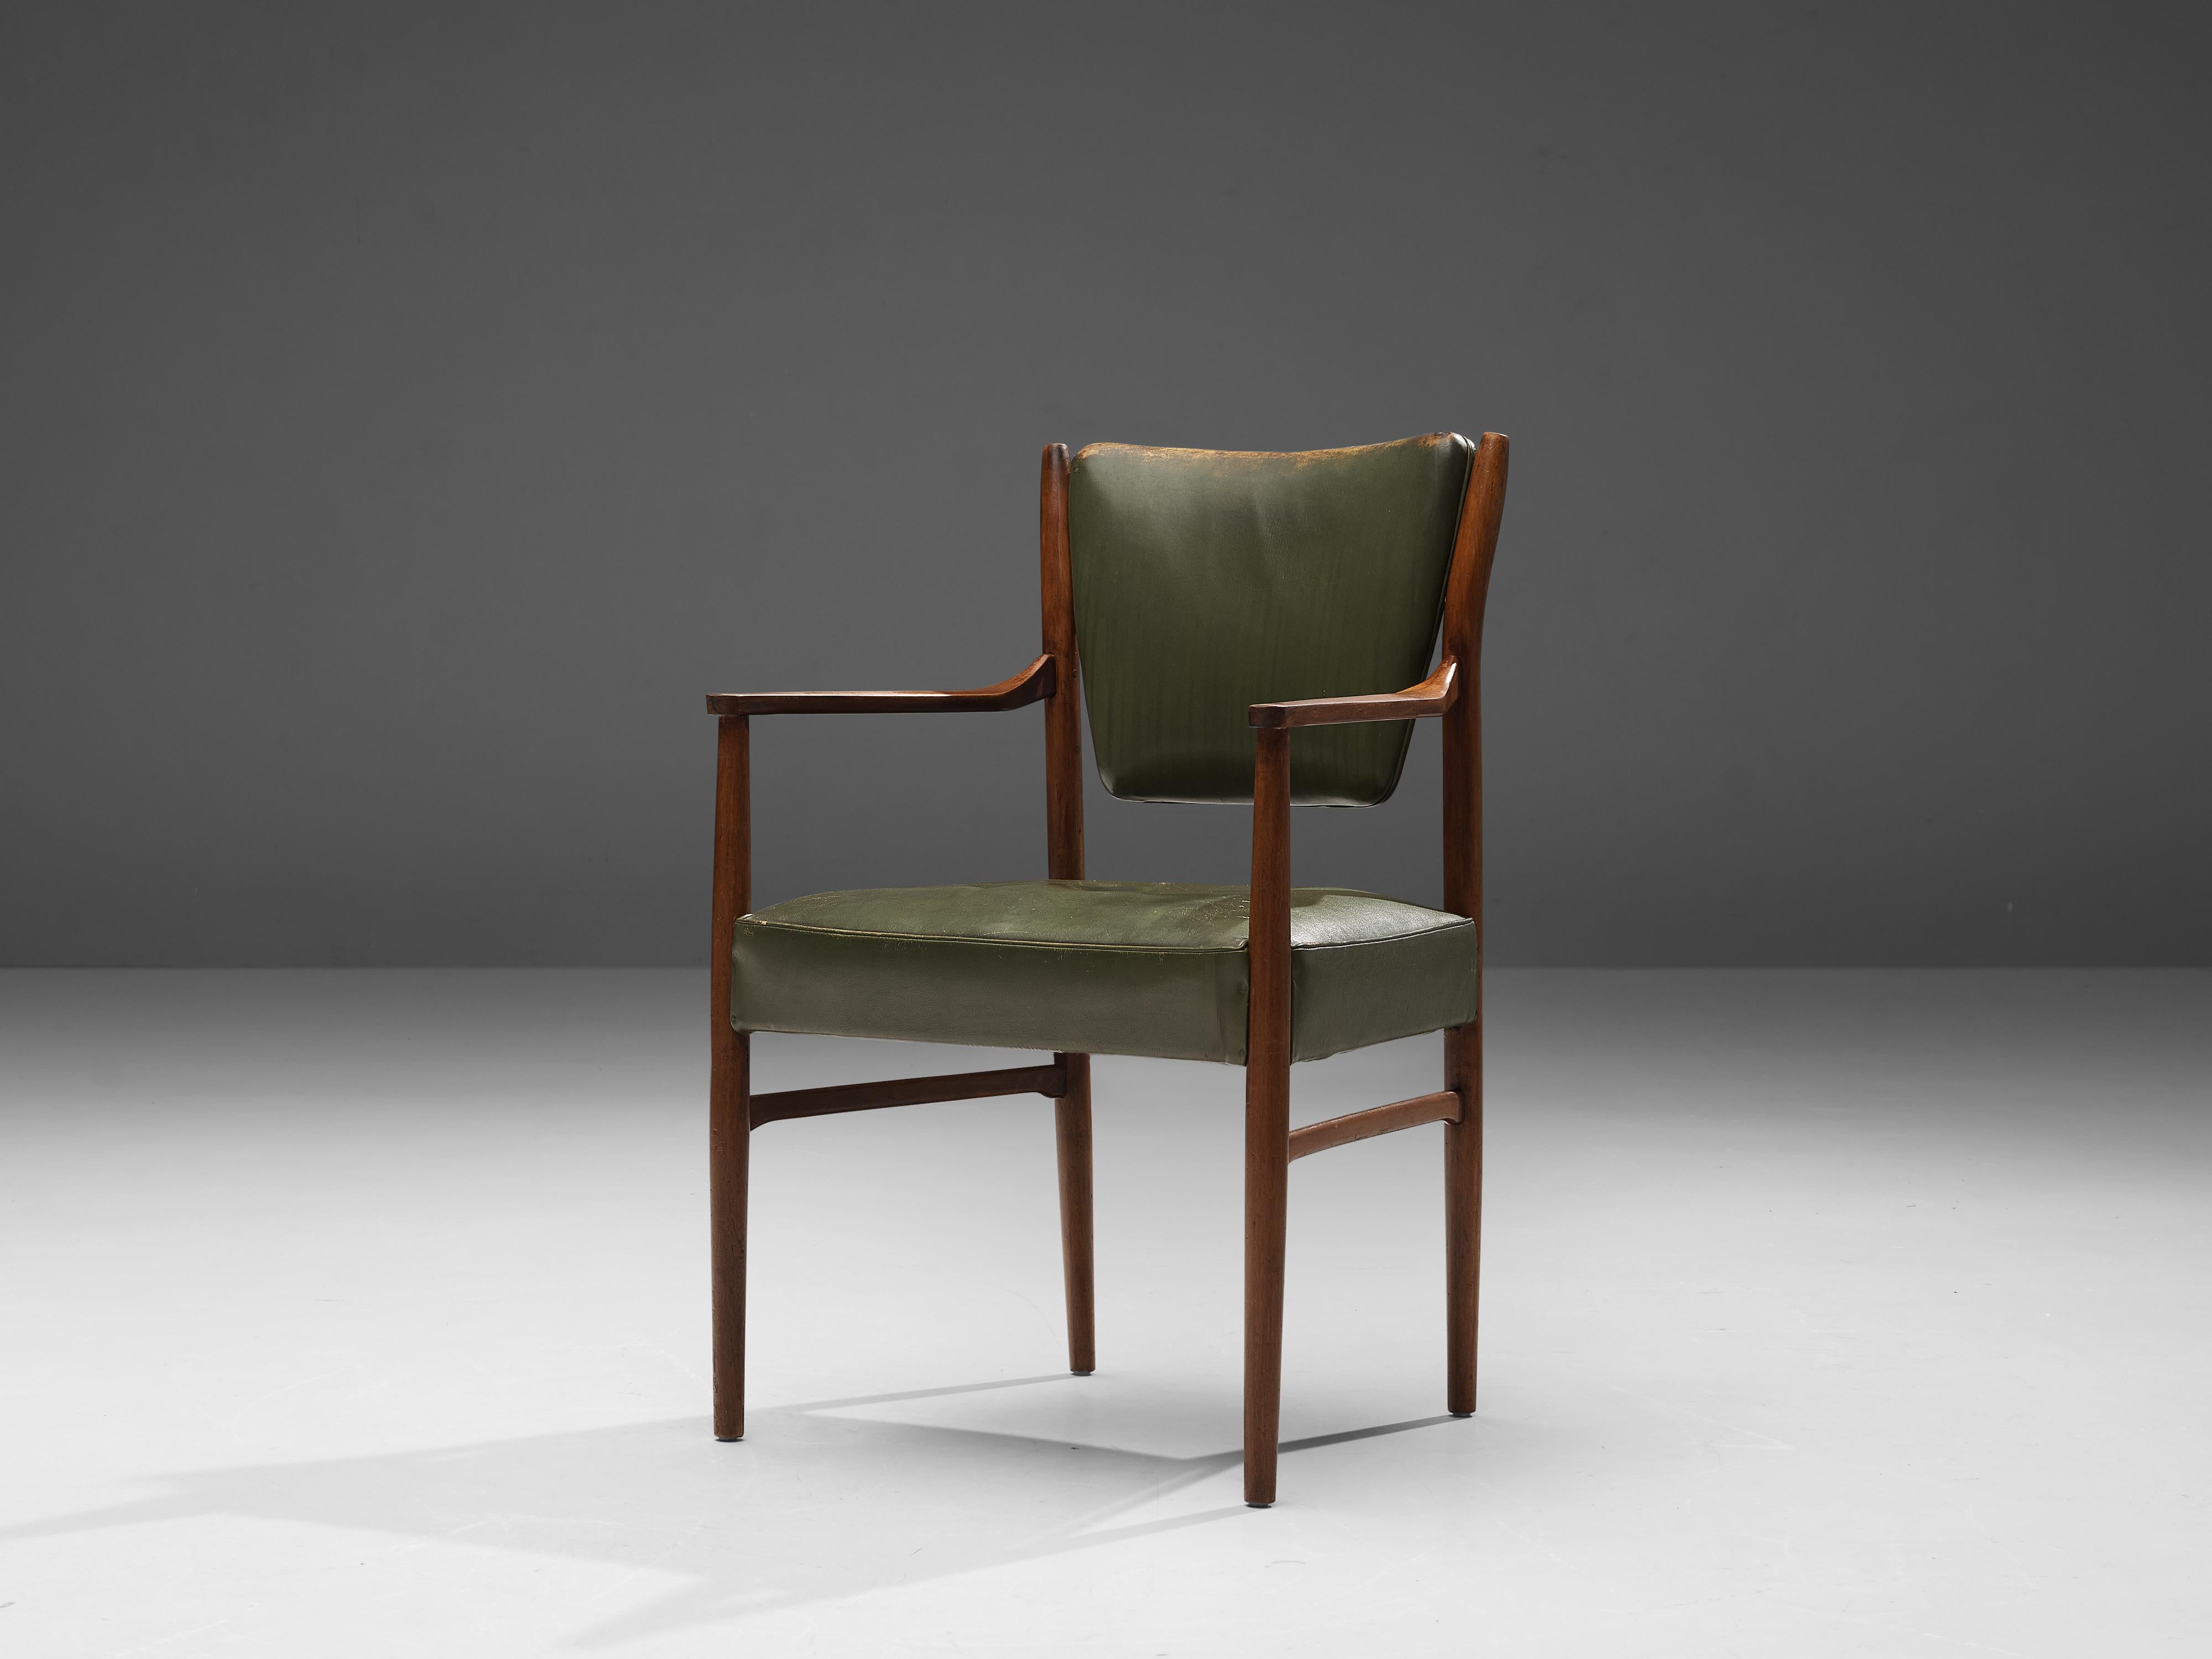 Armchair, walnut, leather, Denmark, 1950s

This elegant armchair in olive green leather and walnut shows signature characteristics of Danish modern design. The frame is modest and very well executed with wonderful details. The armrests are sculpted